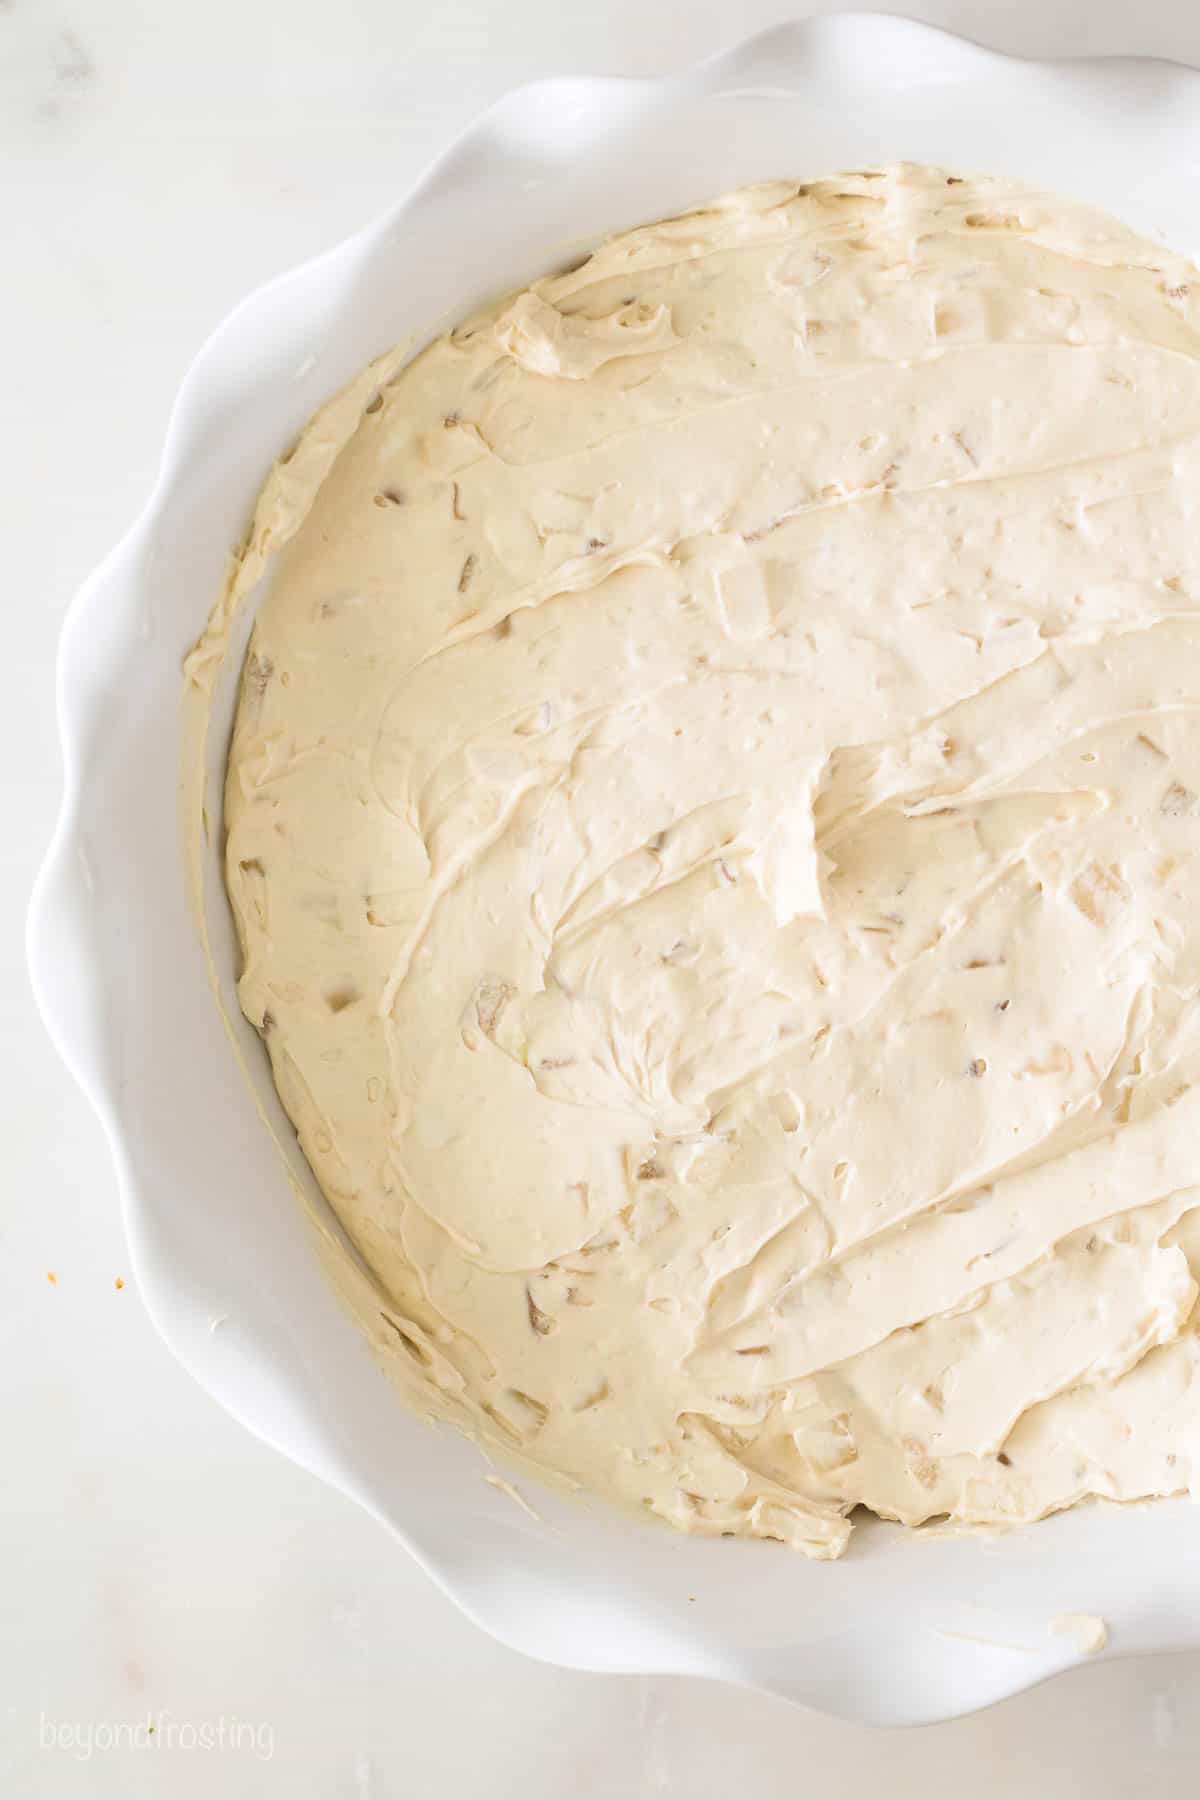 The cream cheese base for cold crab dip in a pie dish